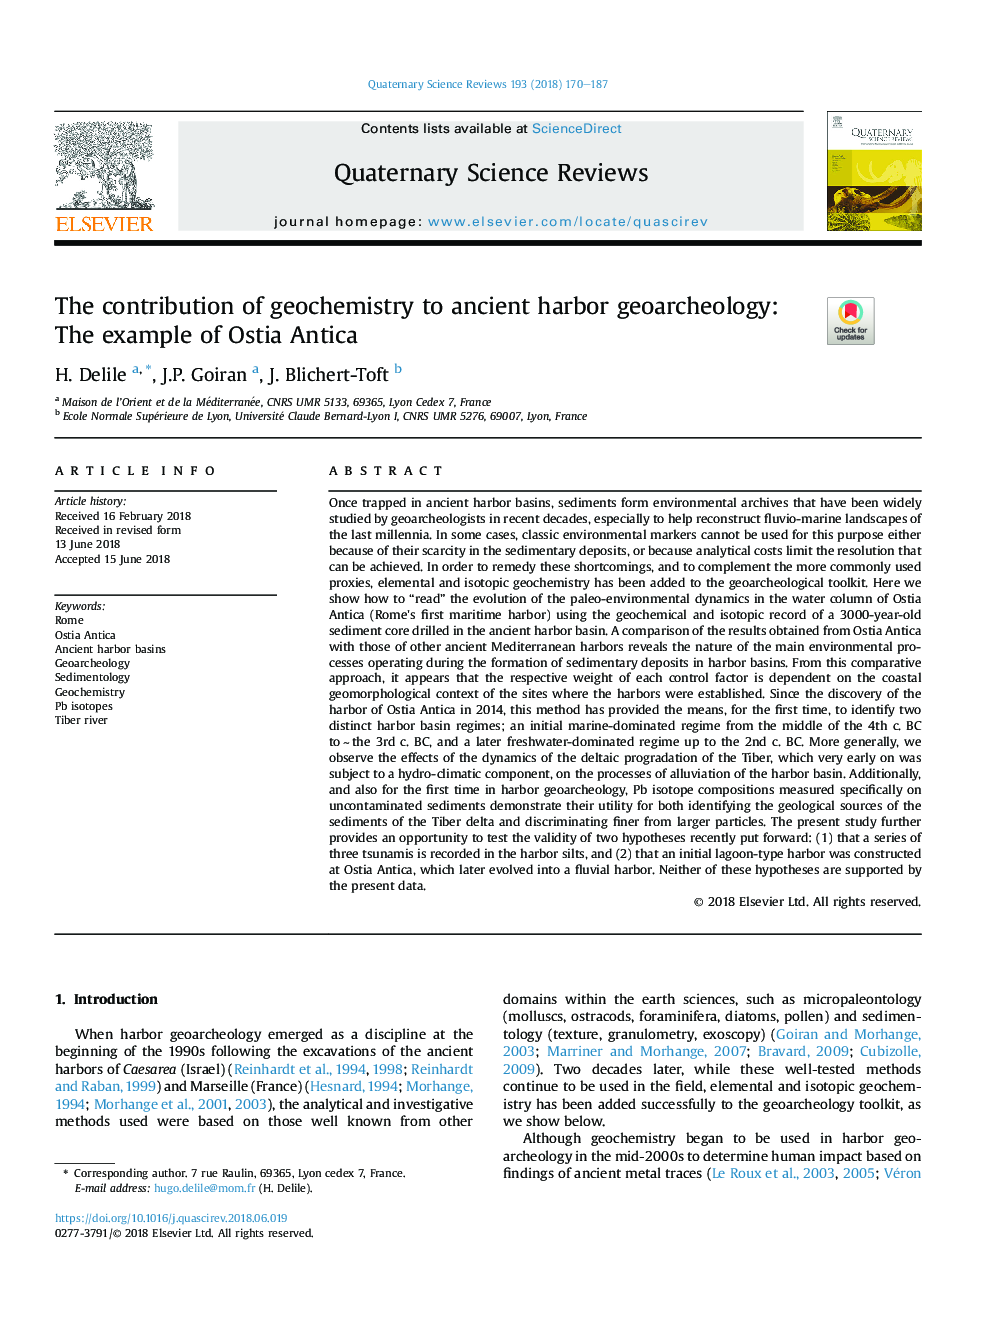 The contribution of geochemistry to ancient harbor geoarcheology: The example of Ostia Antica